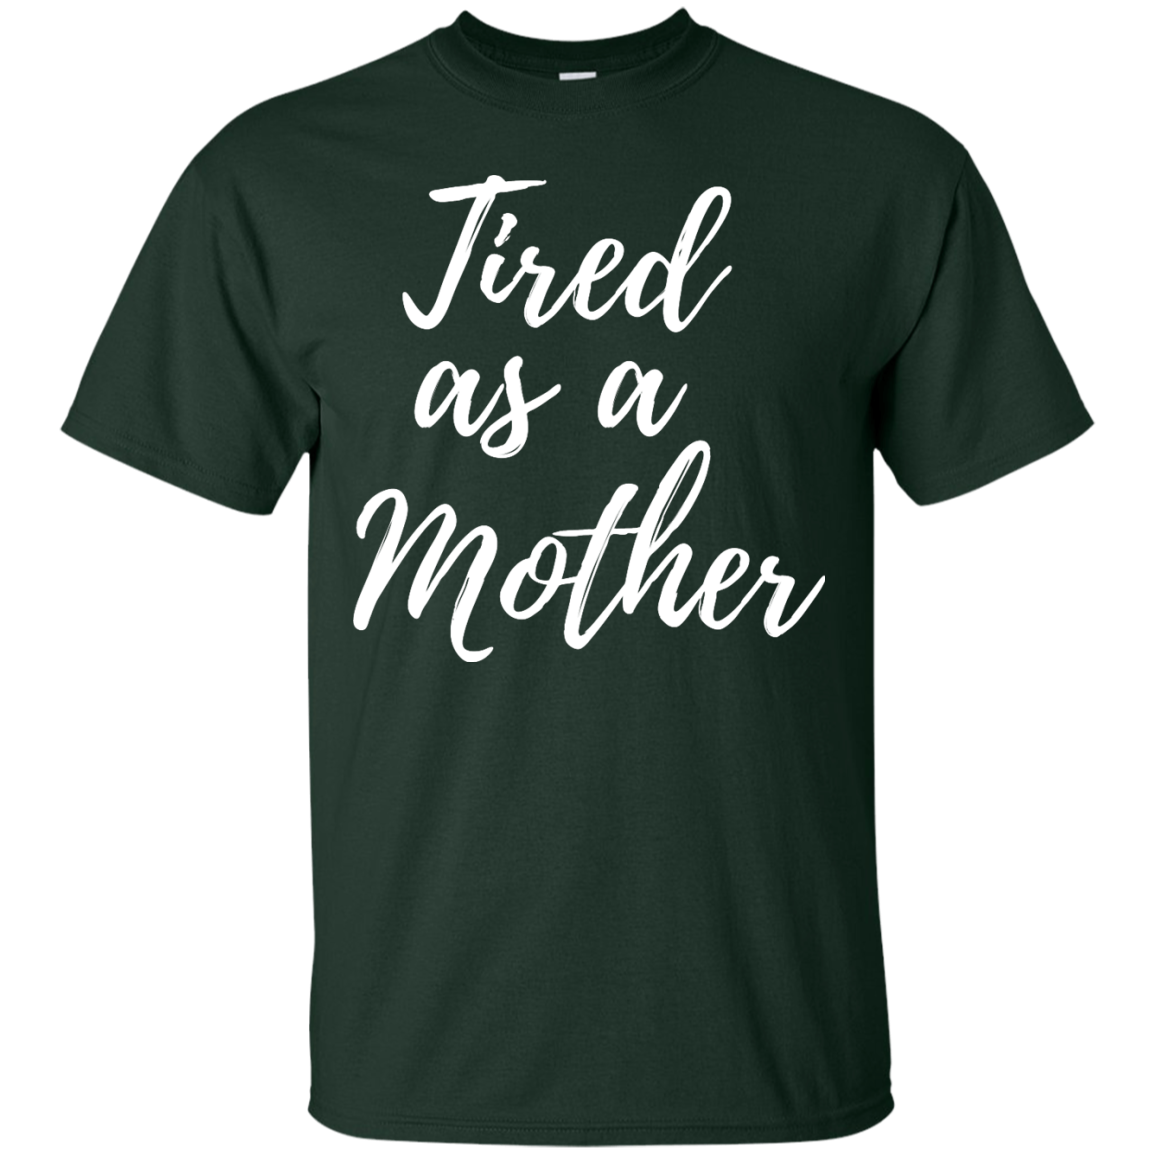 Tired as a Mother shirt, racerback